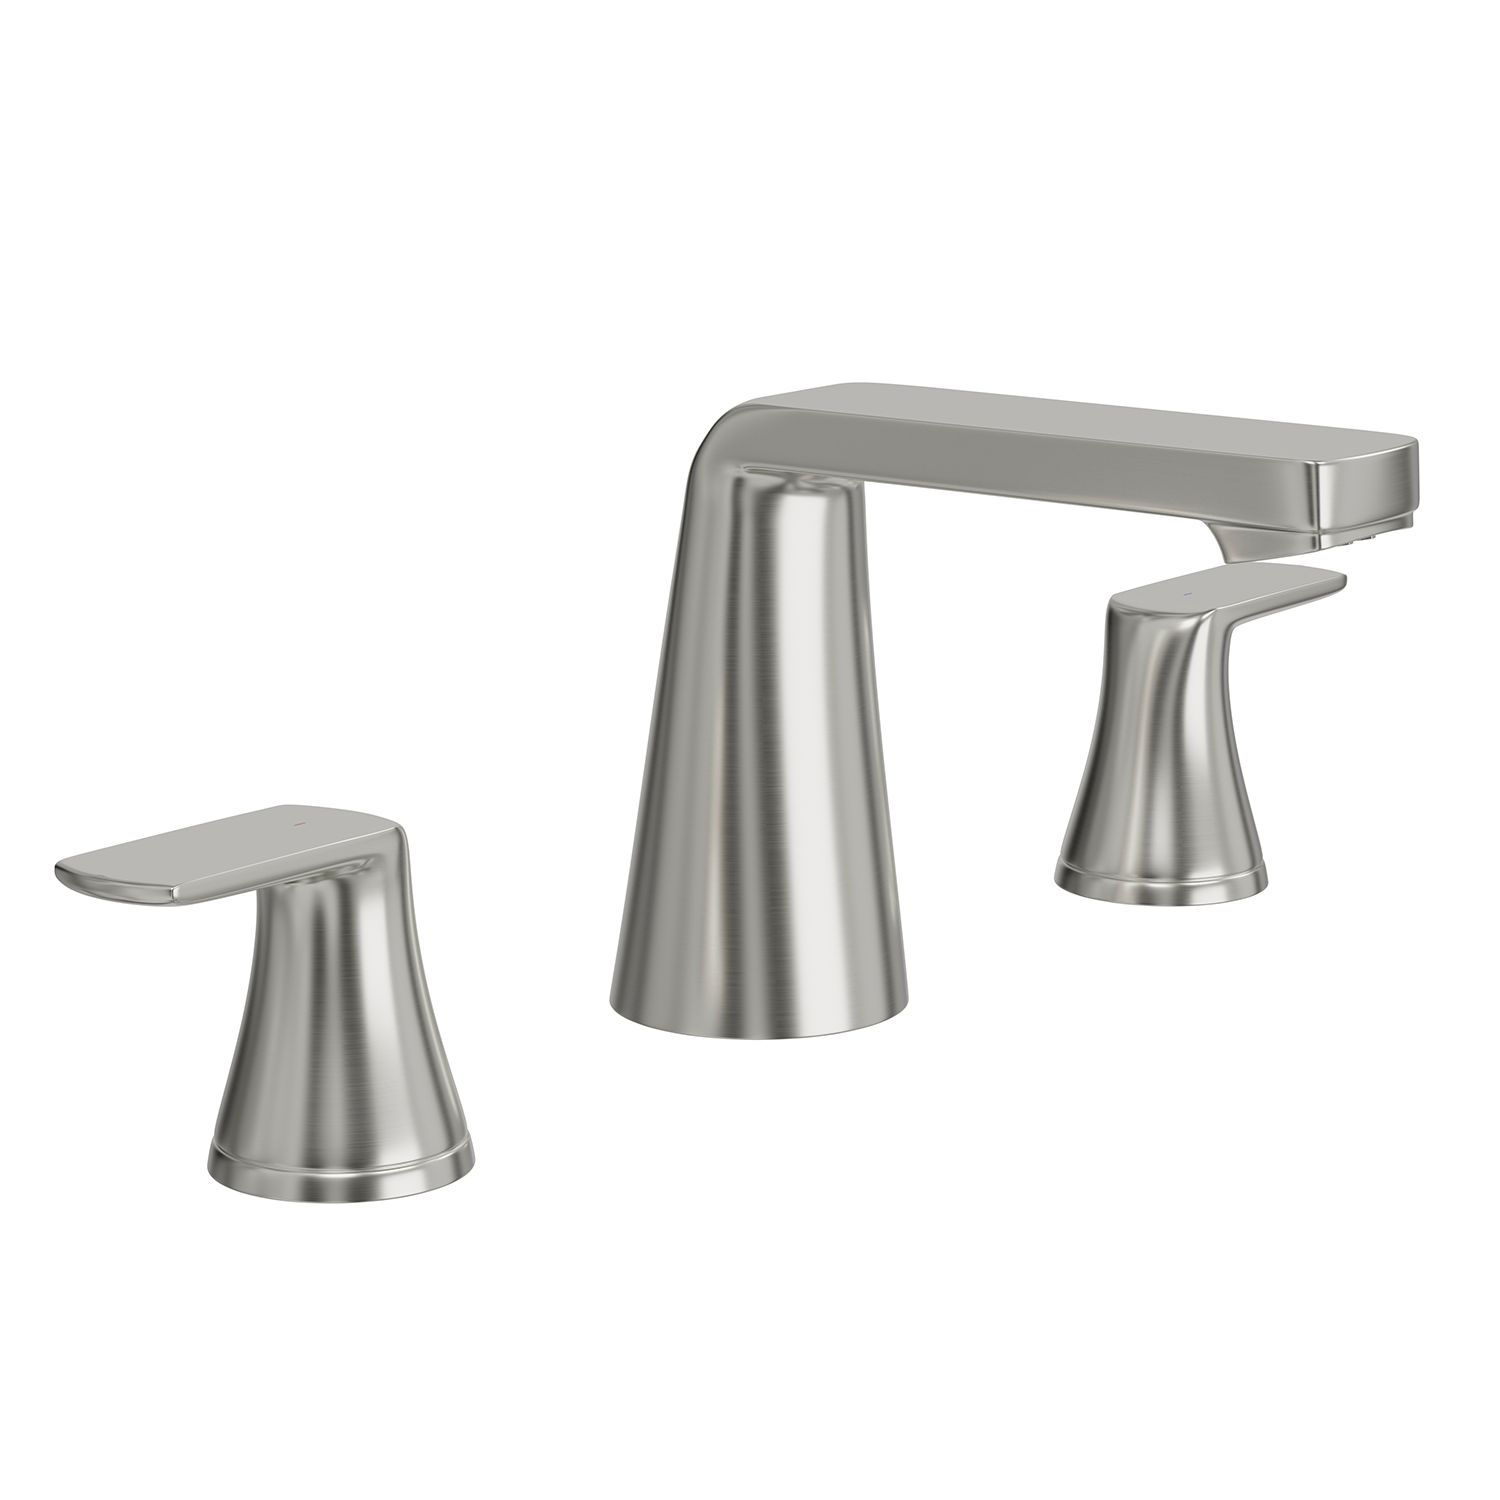 DAX Two Handle Bathroom Faucet, Brass Body, Brushed Nickel Finish, Spout Height 4 Inches (DAX-8236C-BN)